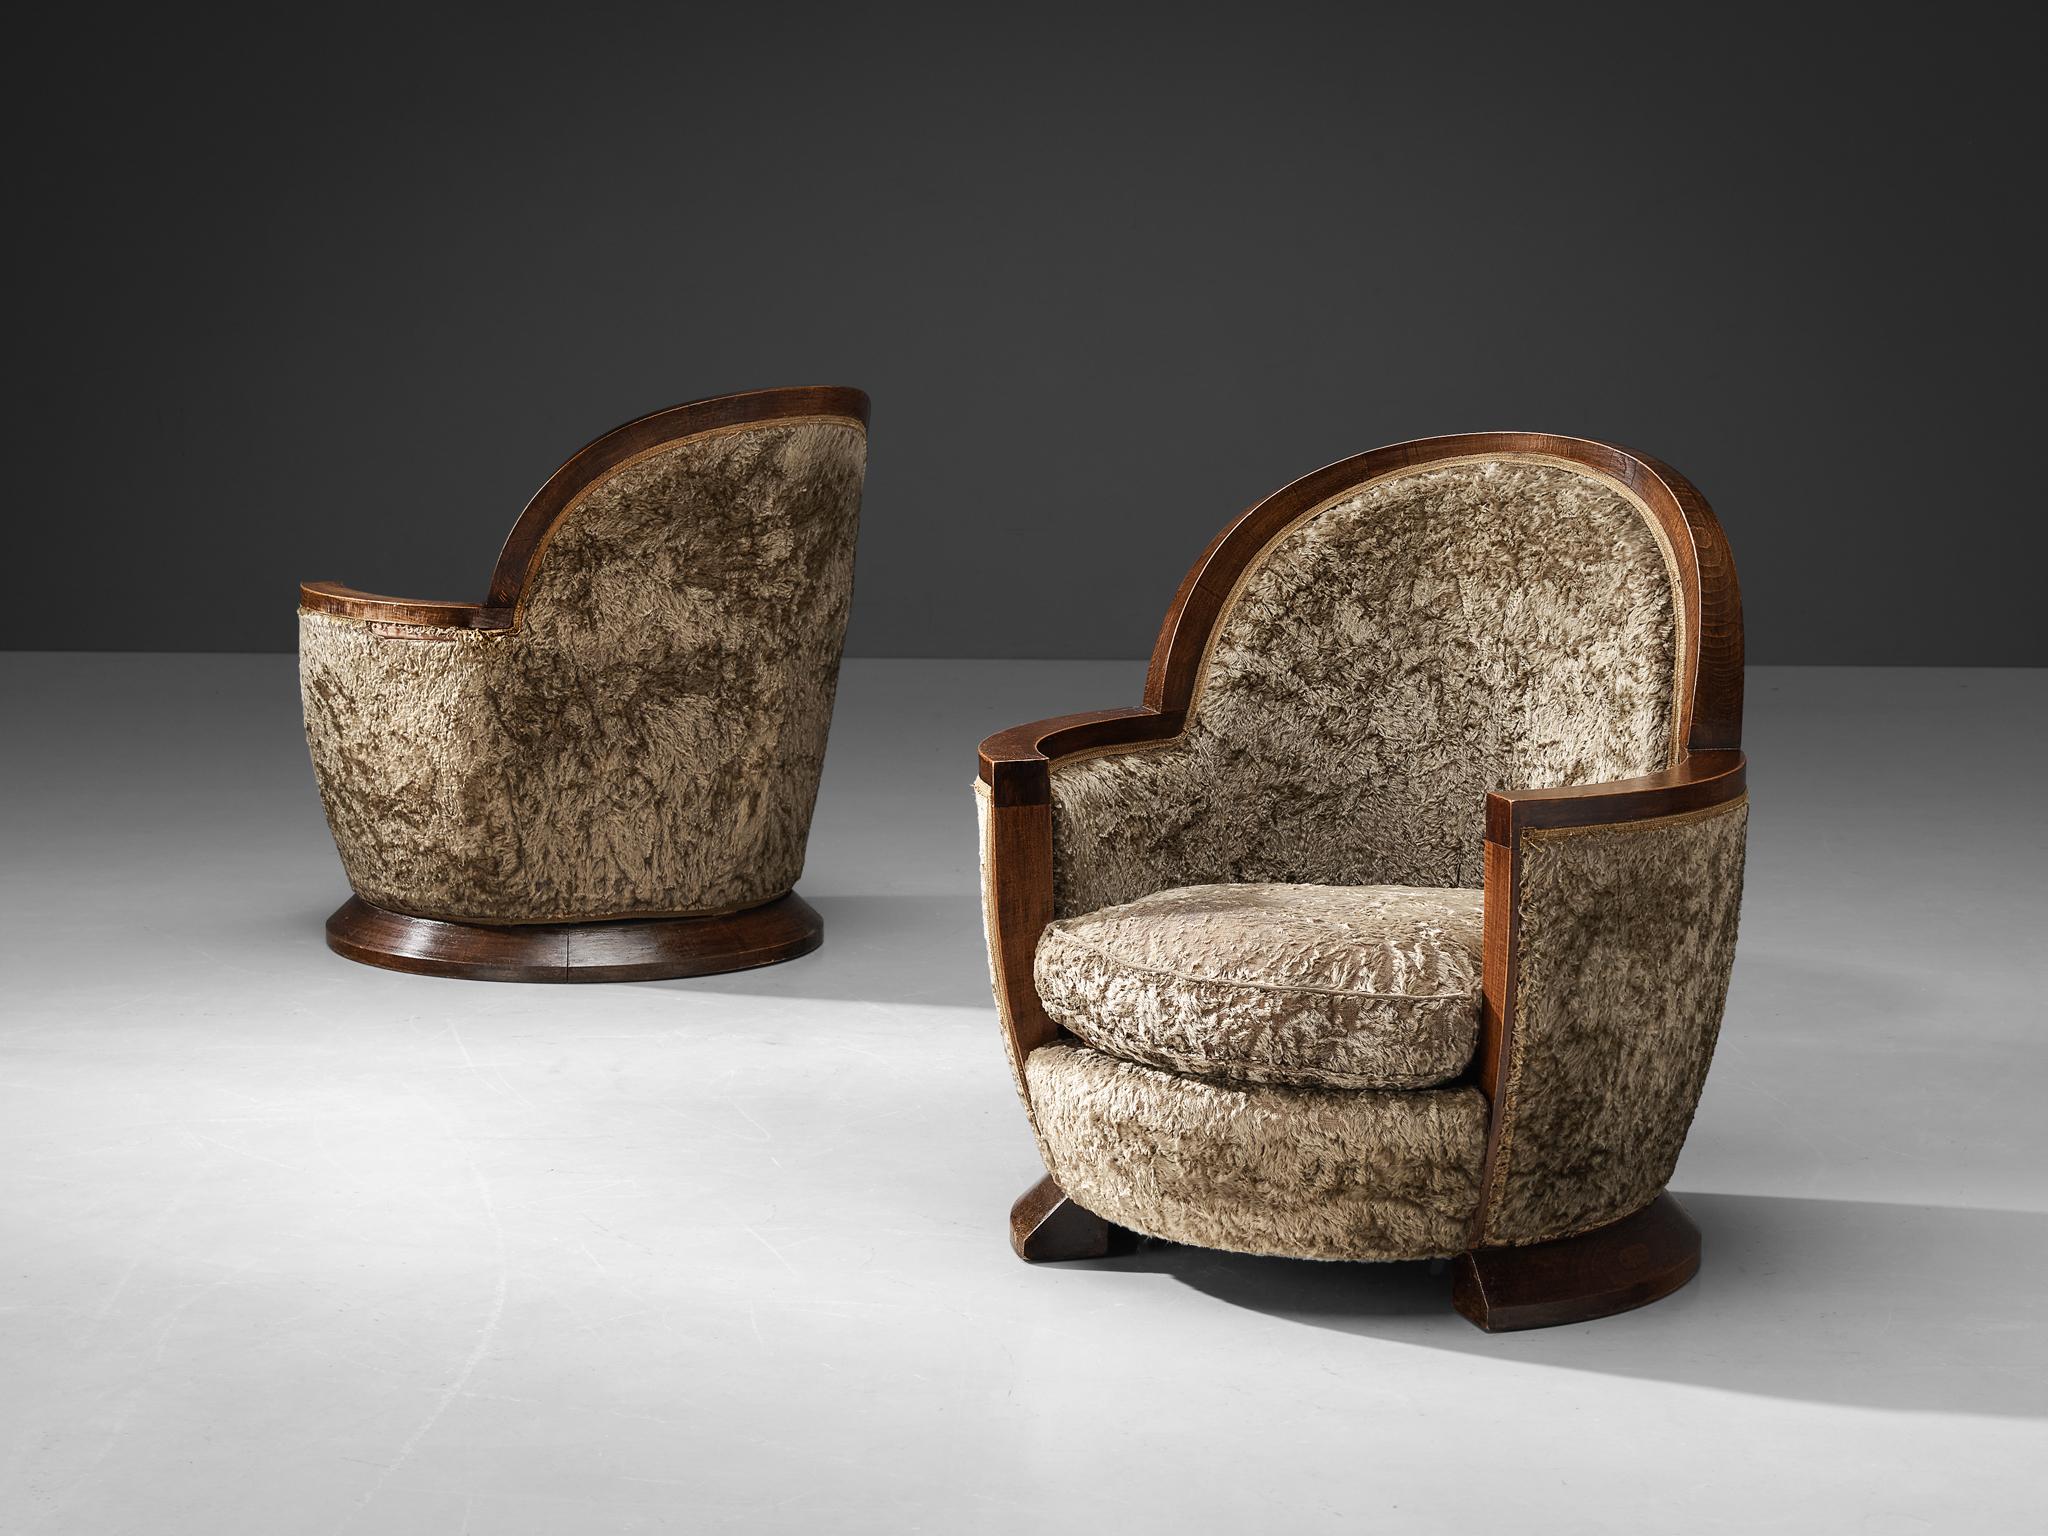 Gabriel Englinger, lounge chairs, wood, long pile velvet upholstery, France, 1928.

Rare pair of Art Deco armchairs designed by Gabriel Englinger in 1928. These chairs are upholstered in a taupe colored long pile velvet fabric which complements the